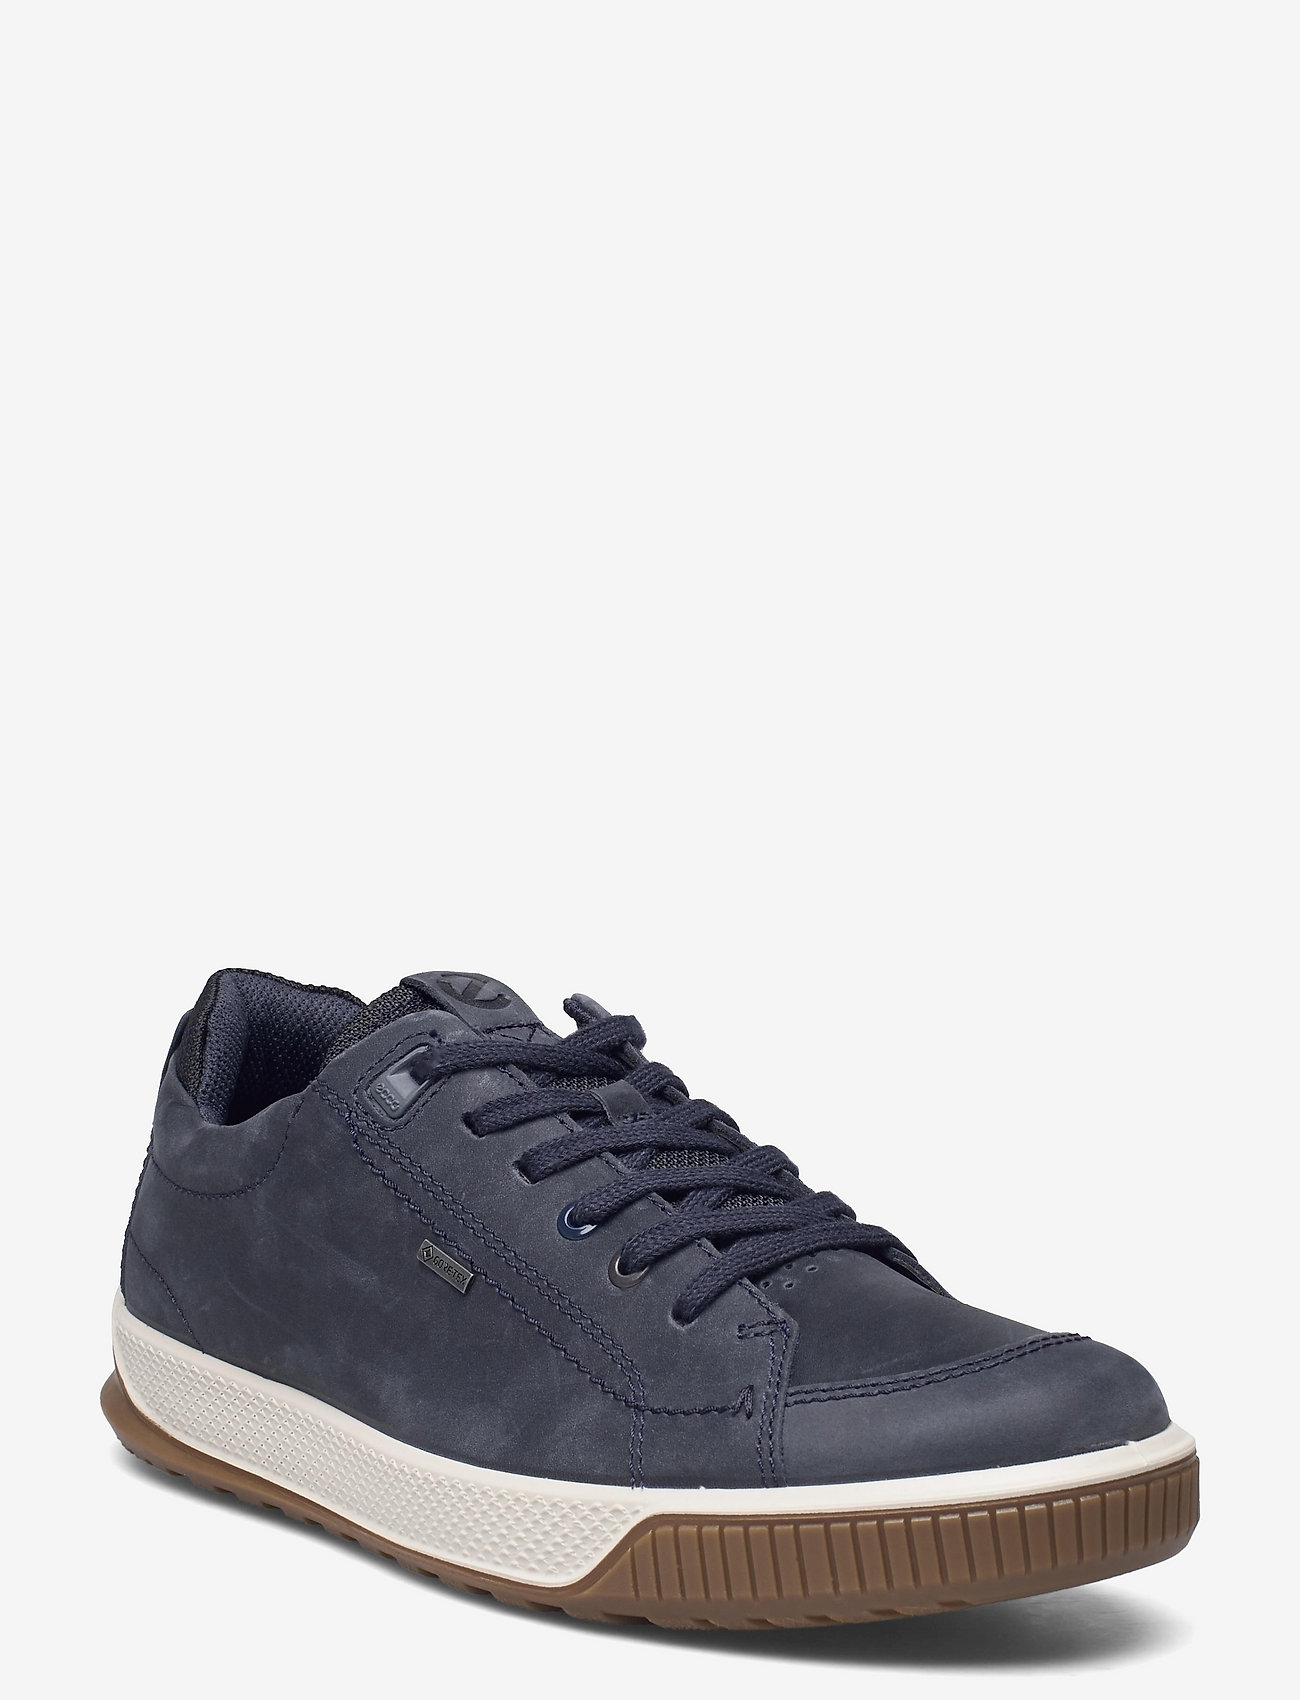 Byway Tred Lave sneakers | Boozt.com